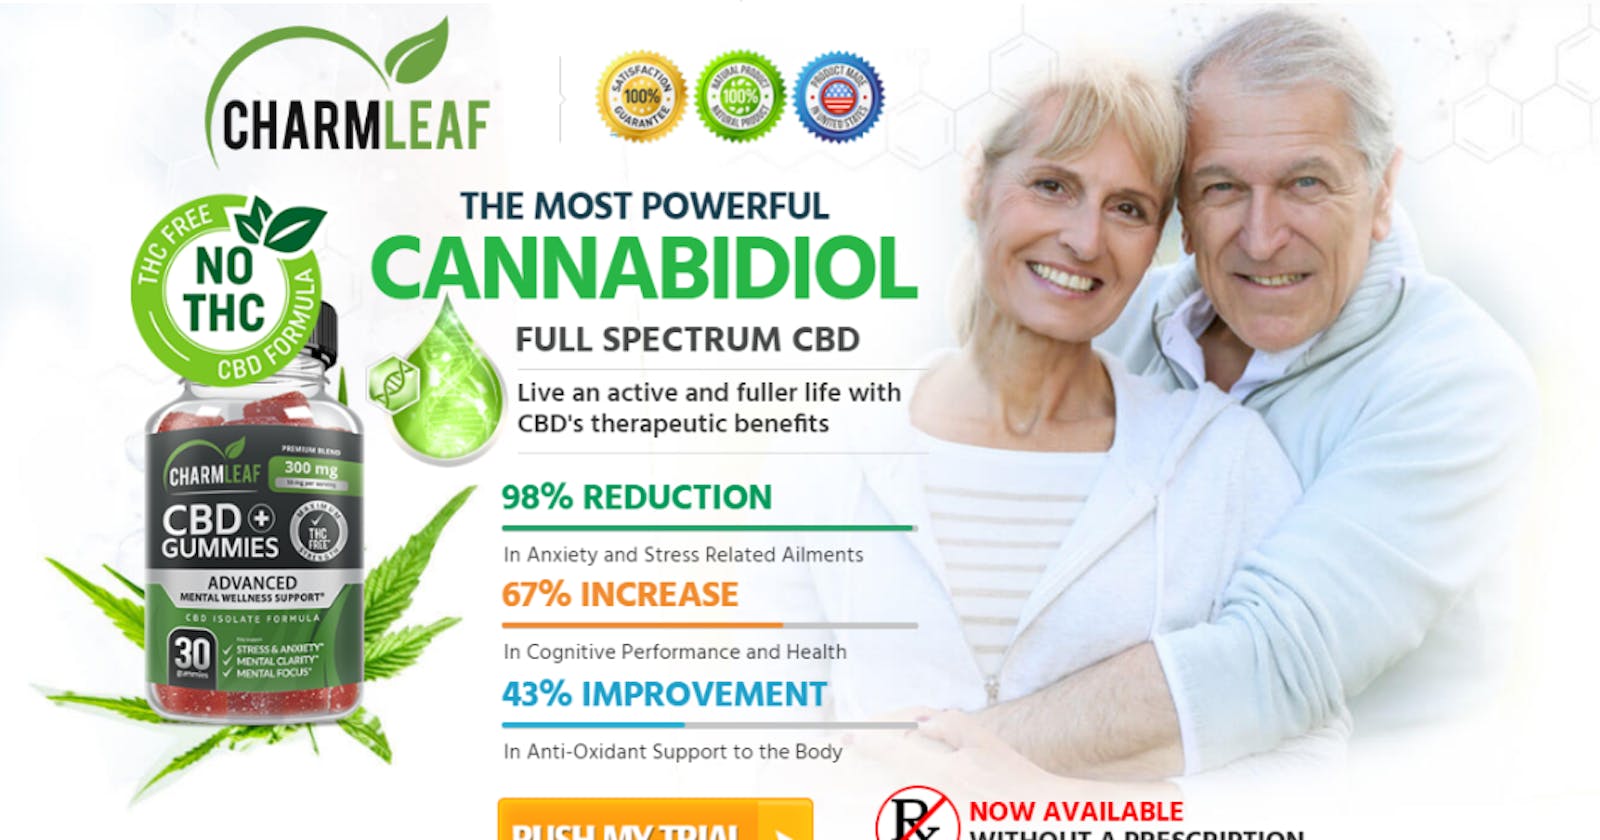 Charm Leaf CBD Gummies Reviews SHOCKING Report Know The Side Effects And Ingredients Used In CBD Gummies Trustworthy Brand or Cheap CBD Gummy?